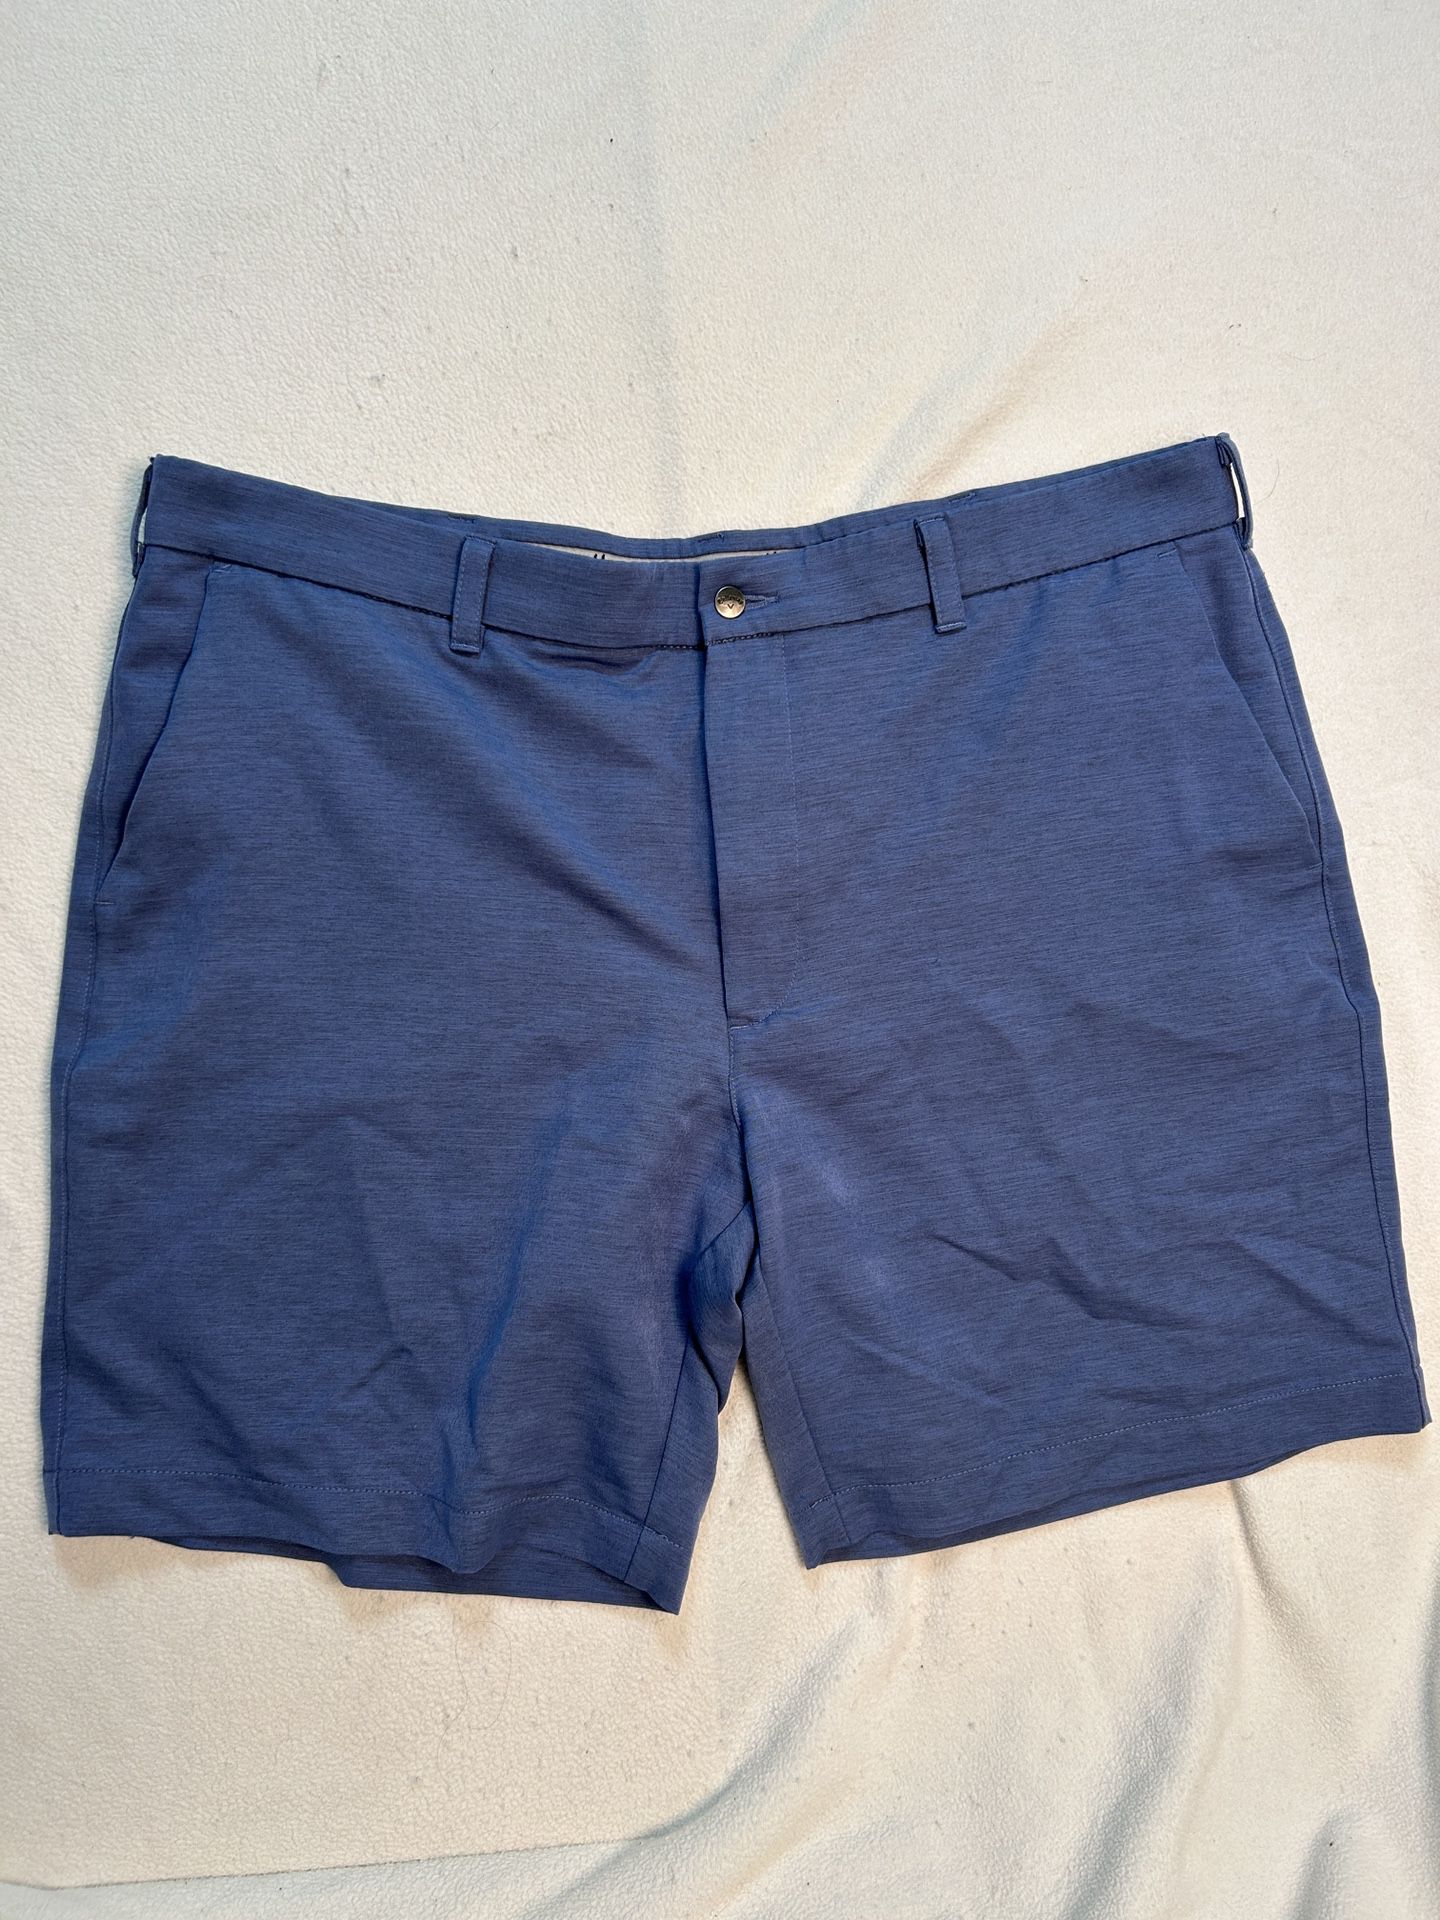 Callaway Blue Golf Shorts Mens Size 40 with 9 Inch Inseam Pockets Flat Front 